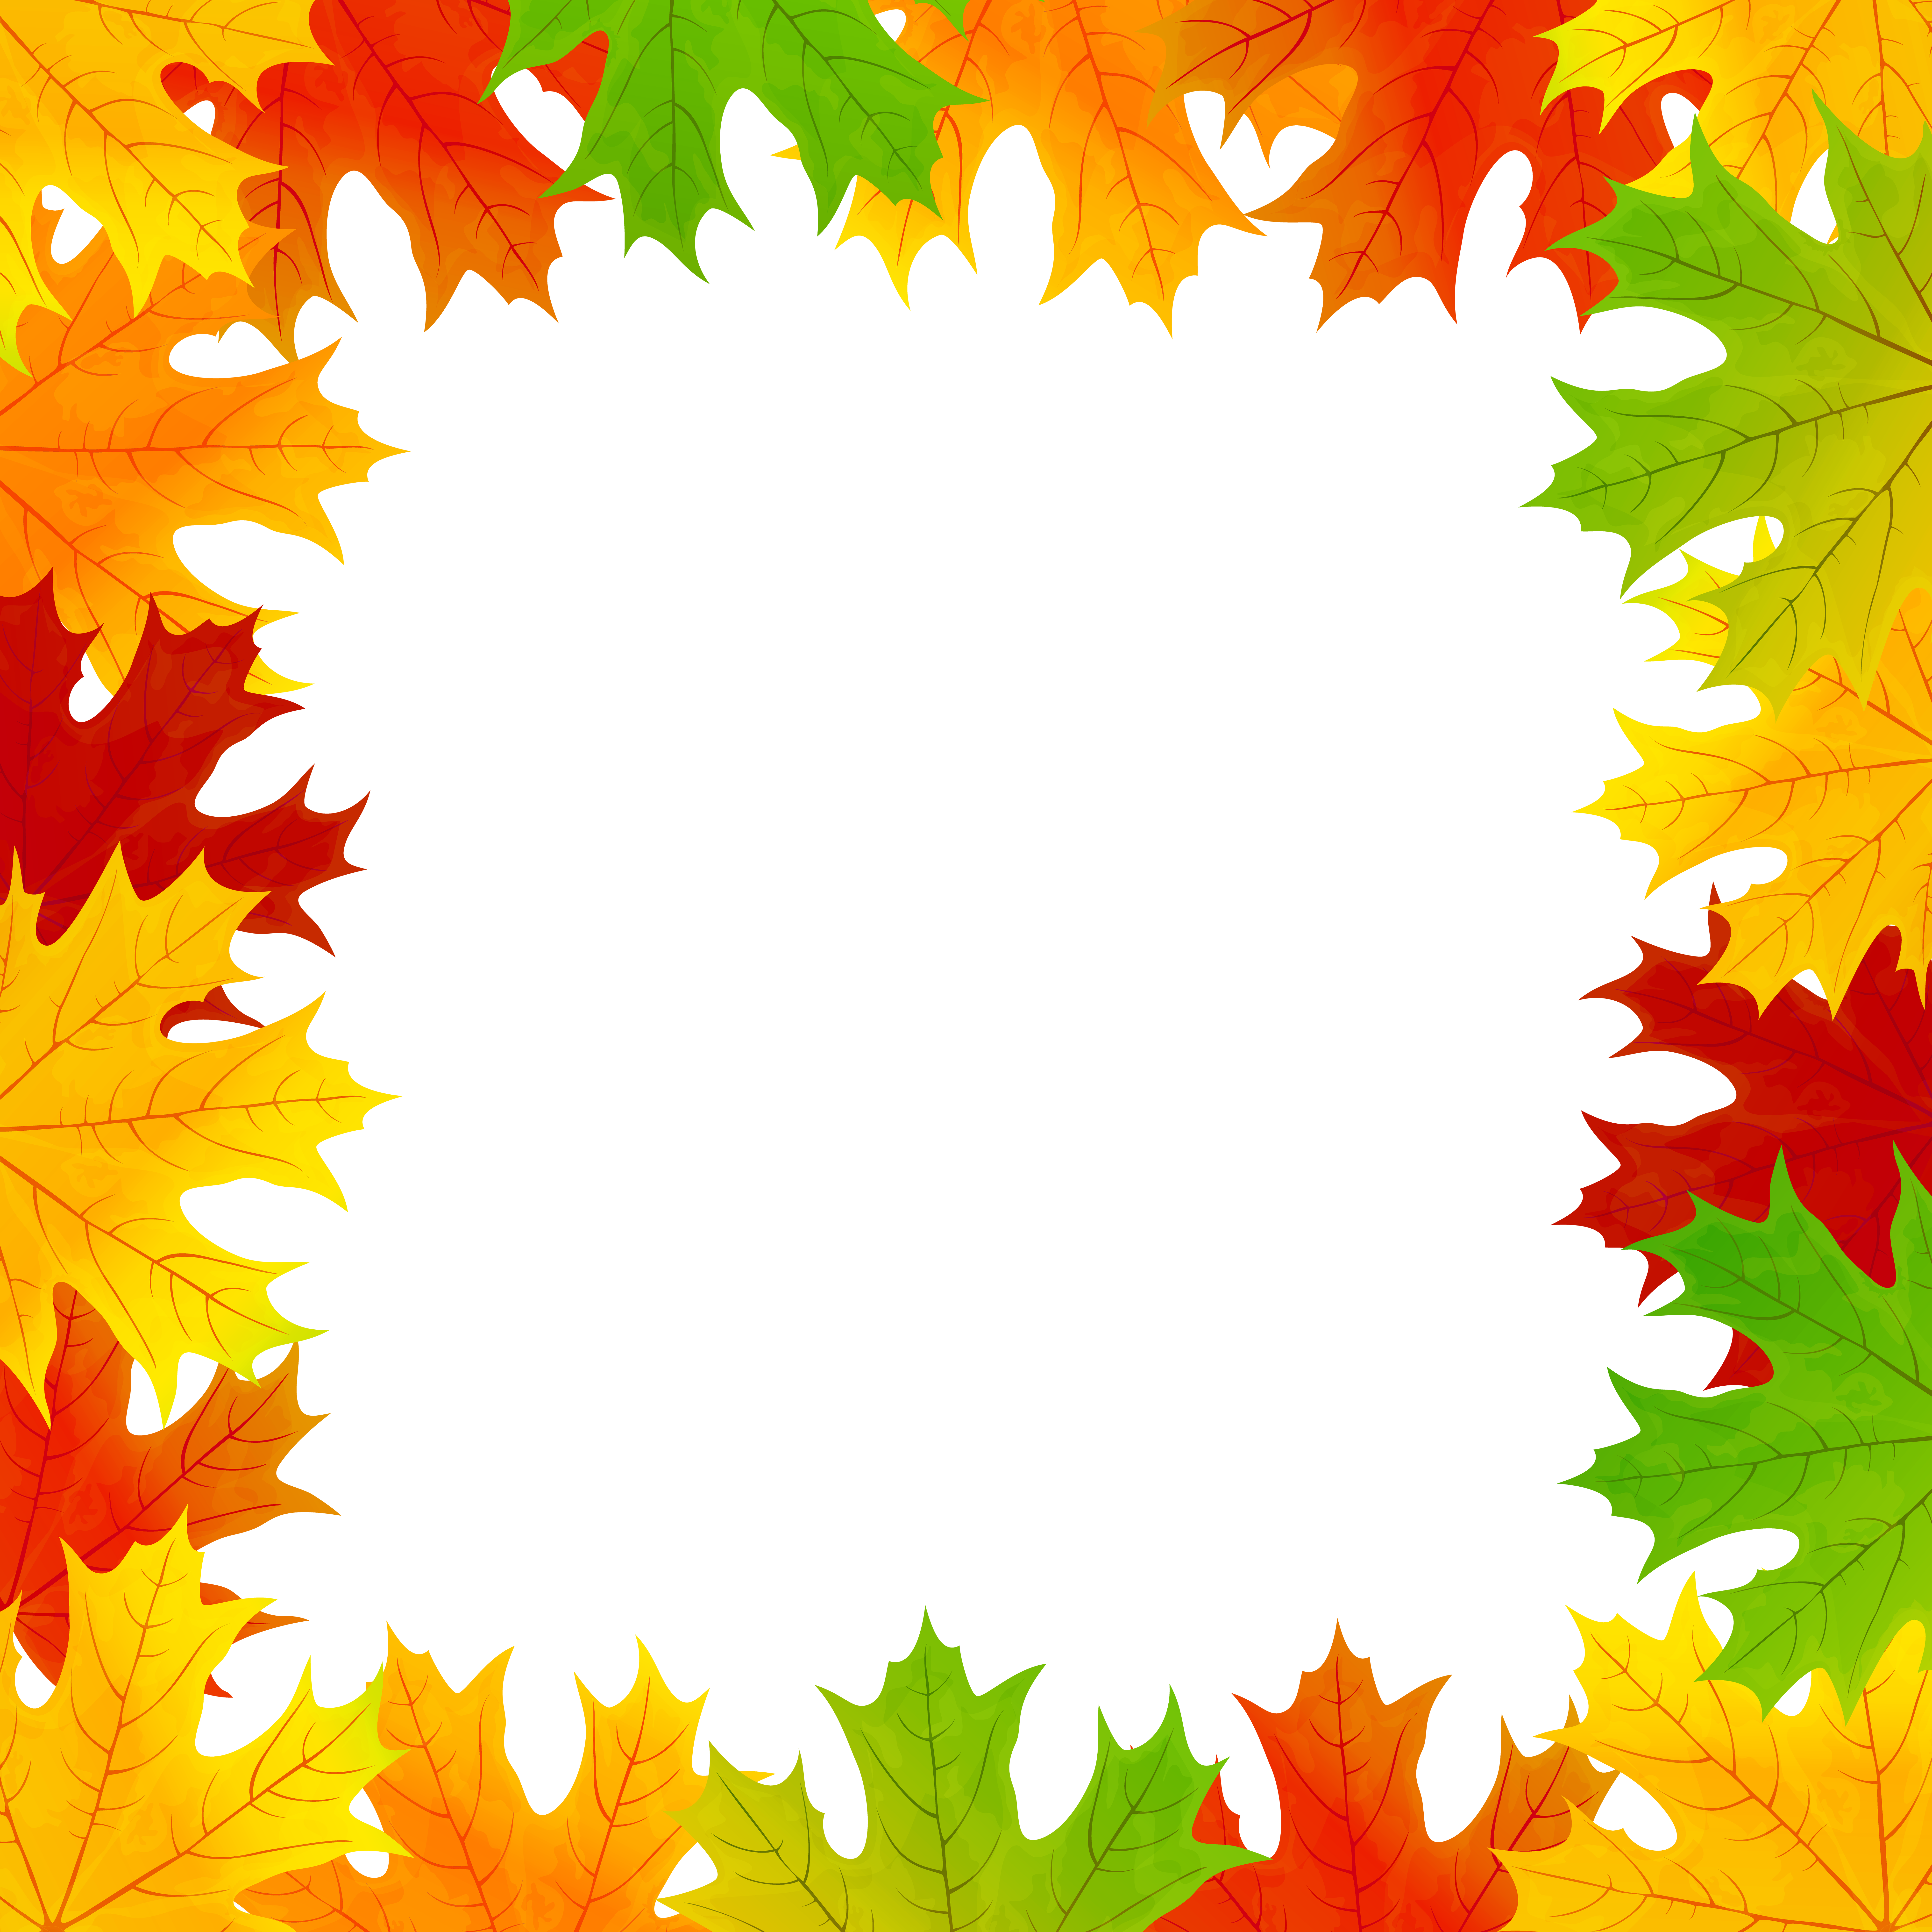 Fall Leaves Border Frame PNG Clip Art Image​-Quality Image and Transparent PNG Free Clipart